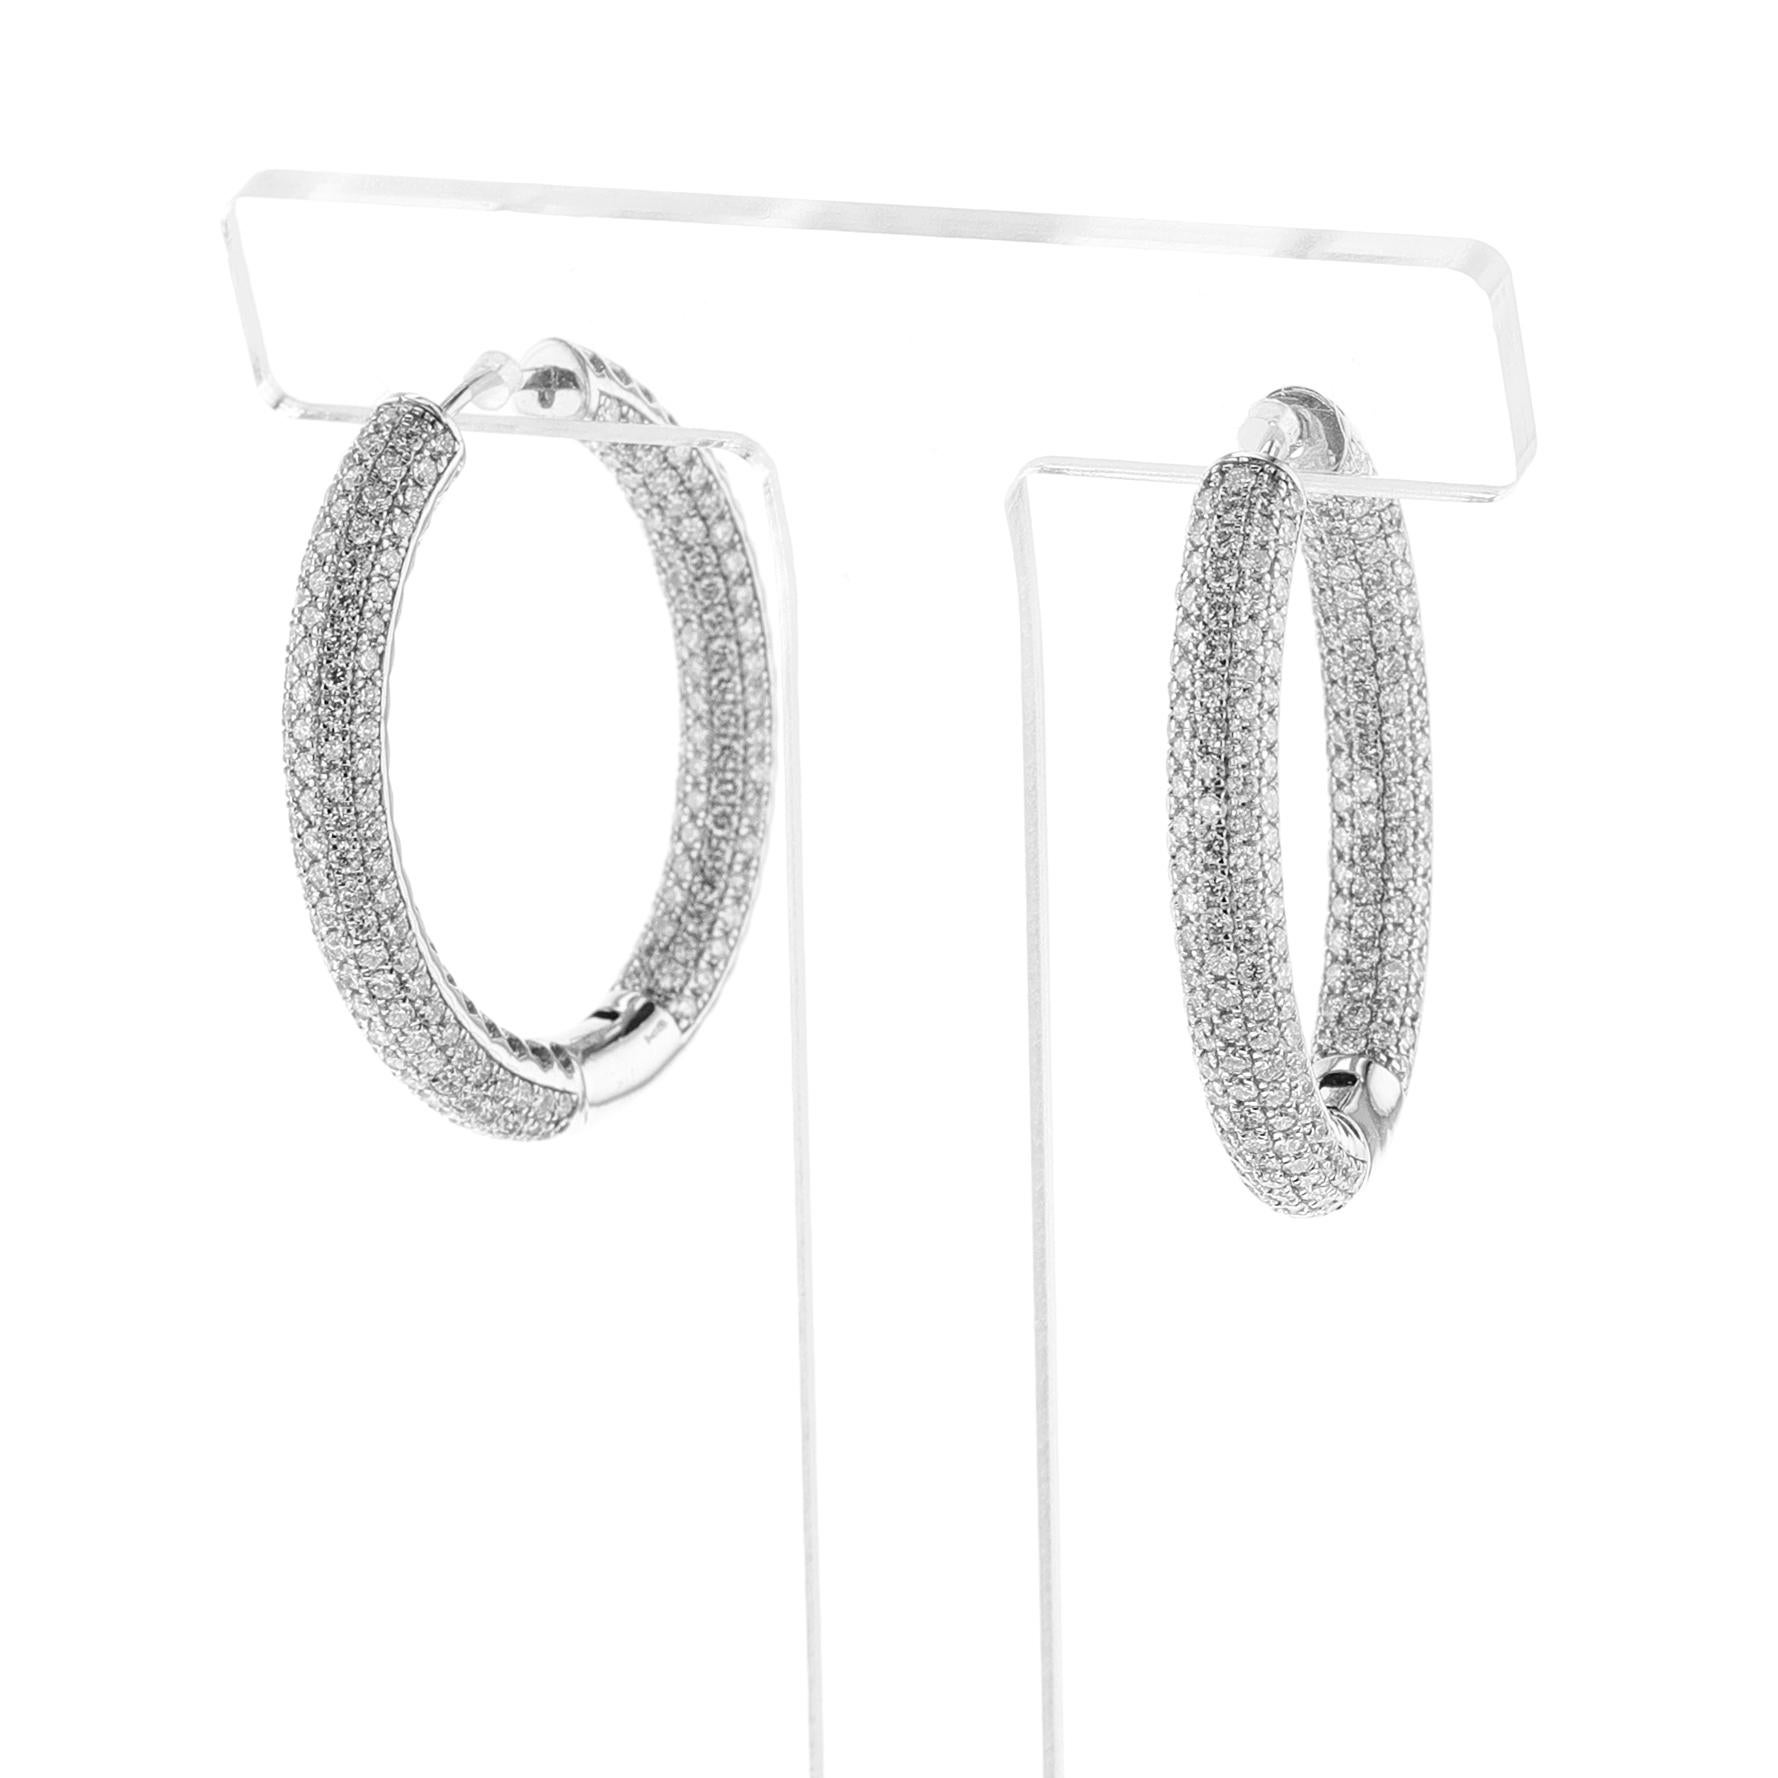 5.7 ct. Diamond Hoop Earrings, 18K In New Condition For Sale In New York, NY